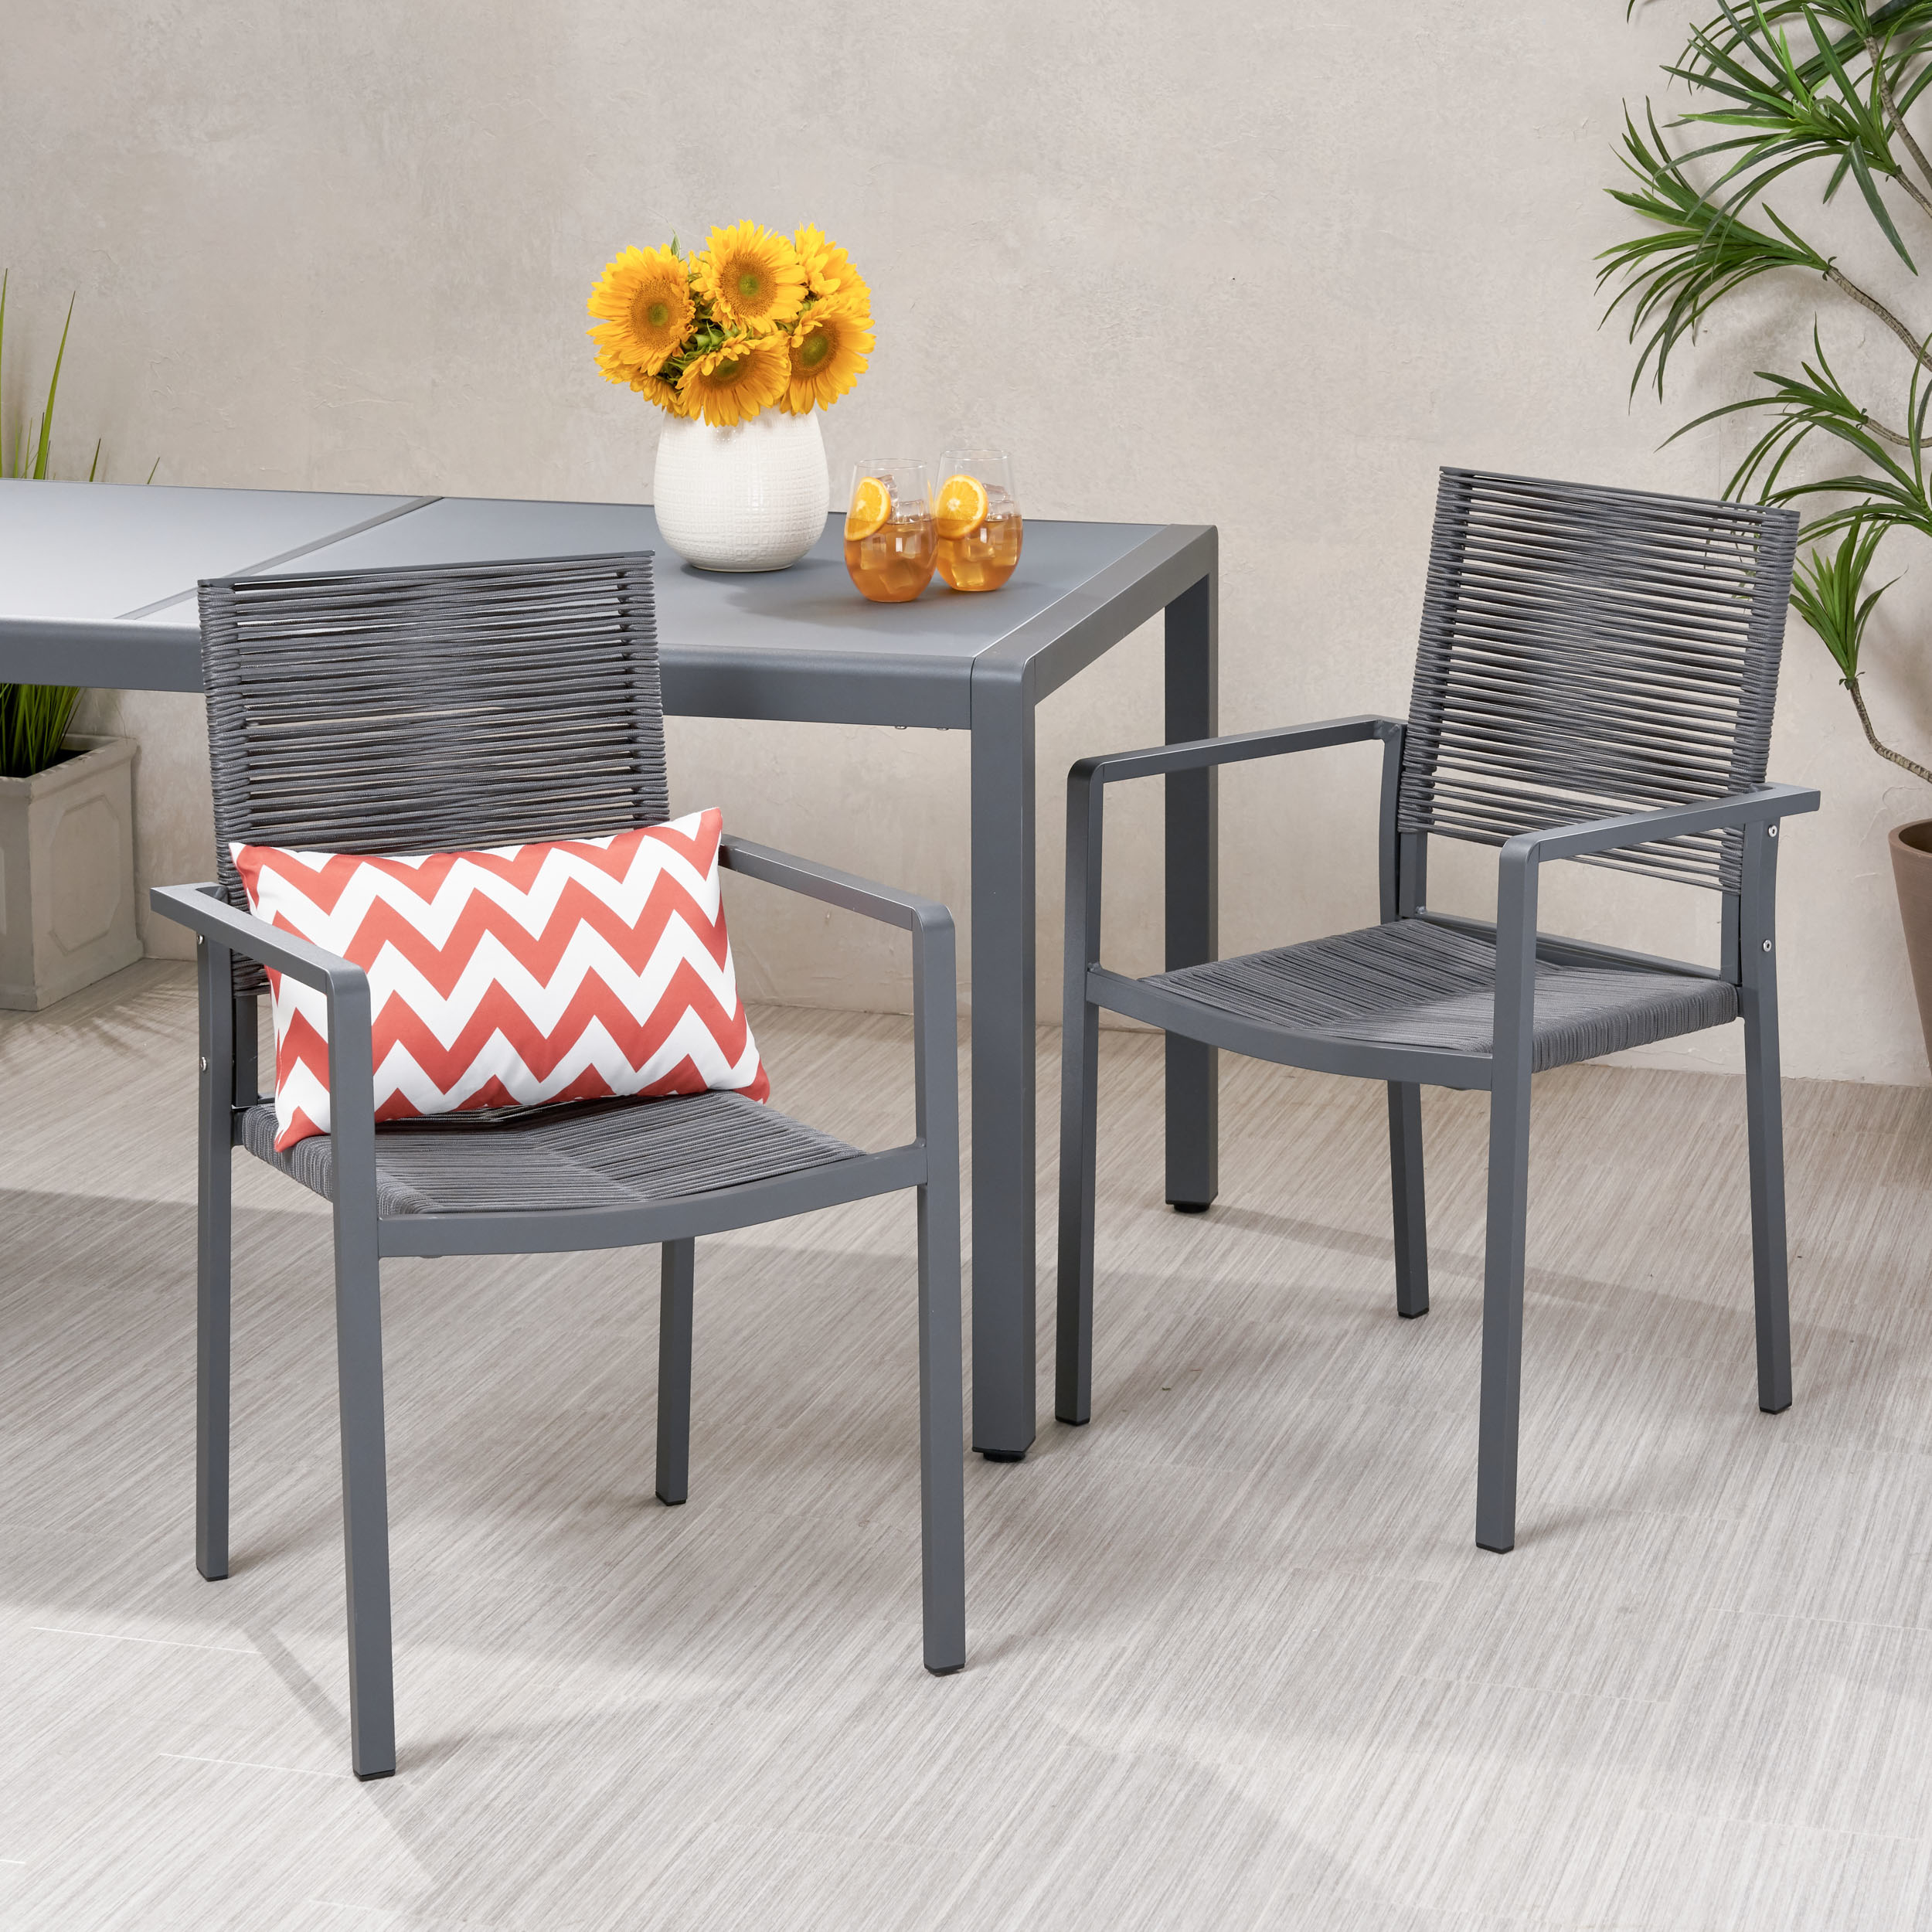 Jean Outdoor Modern Aluminum Dining Chair With Rope Seat (Set Of 2) - Gray + Dark Gray